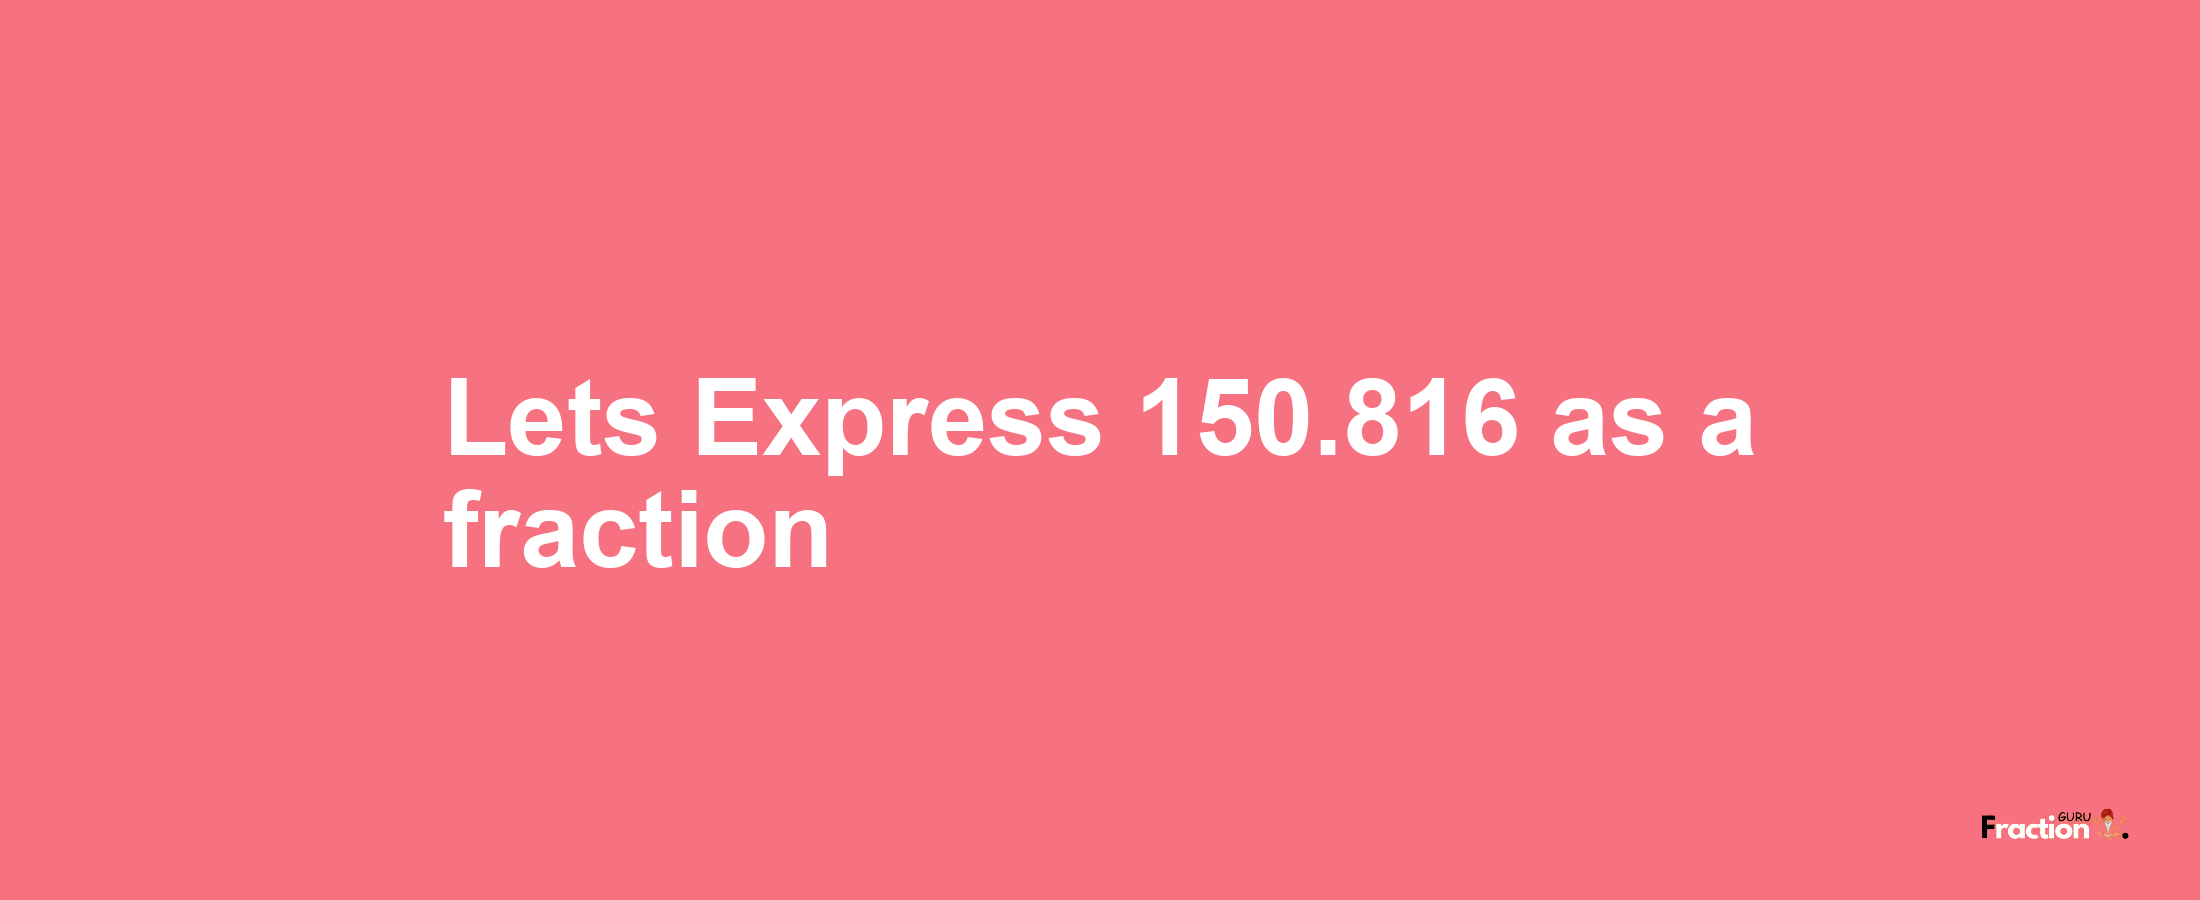 Lets Express 150.816 as afraction